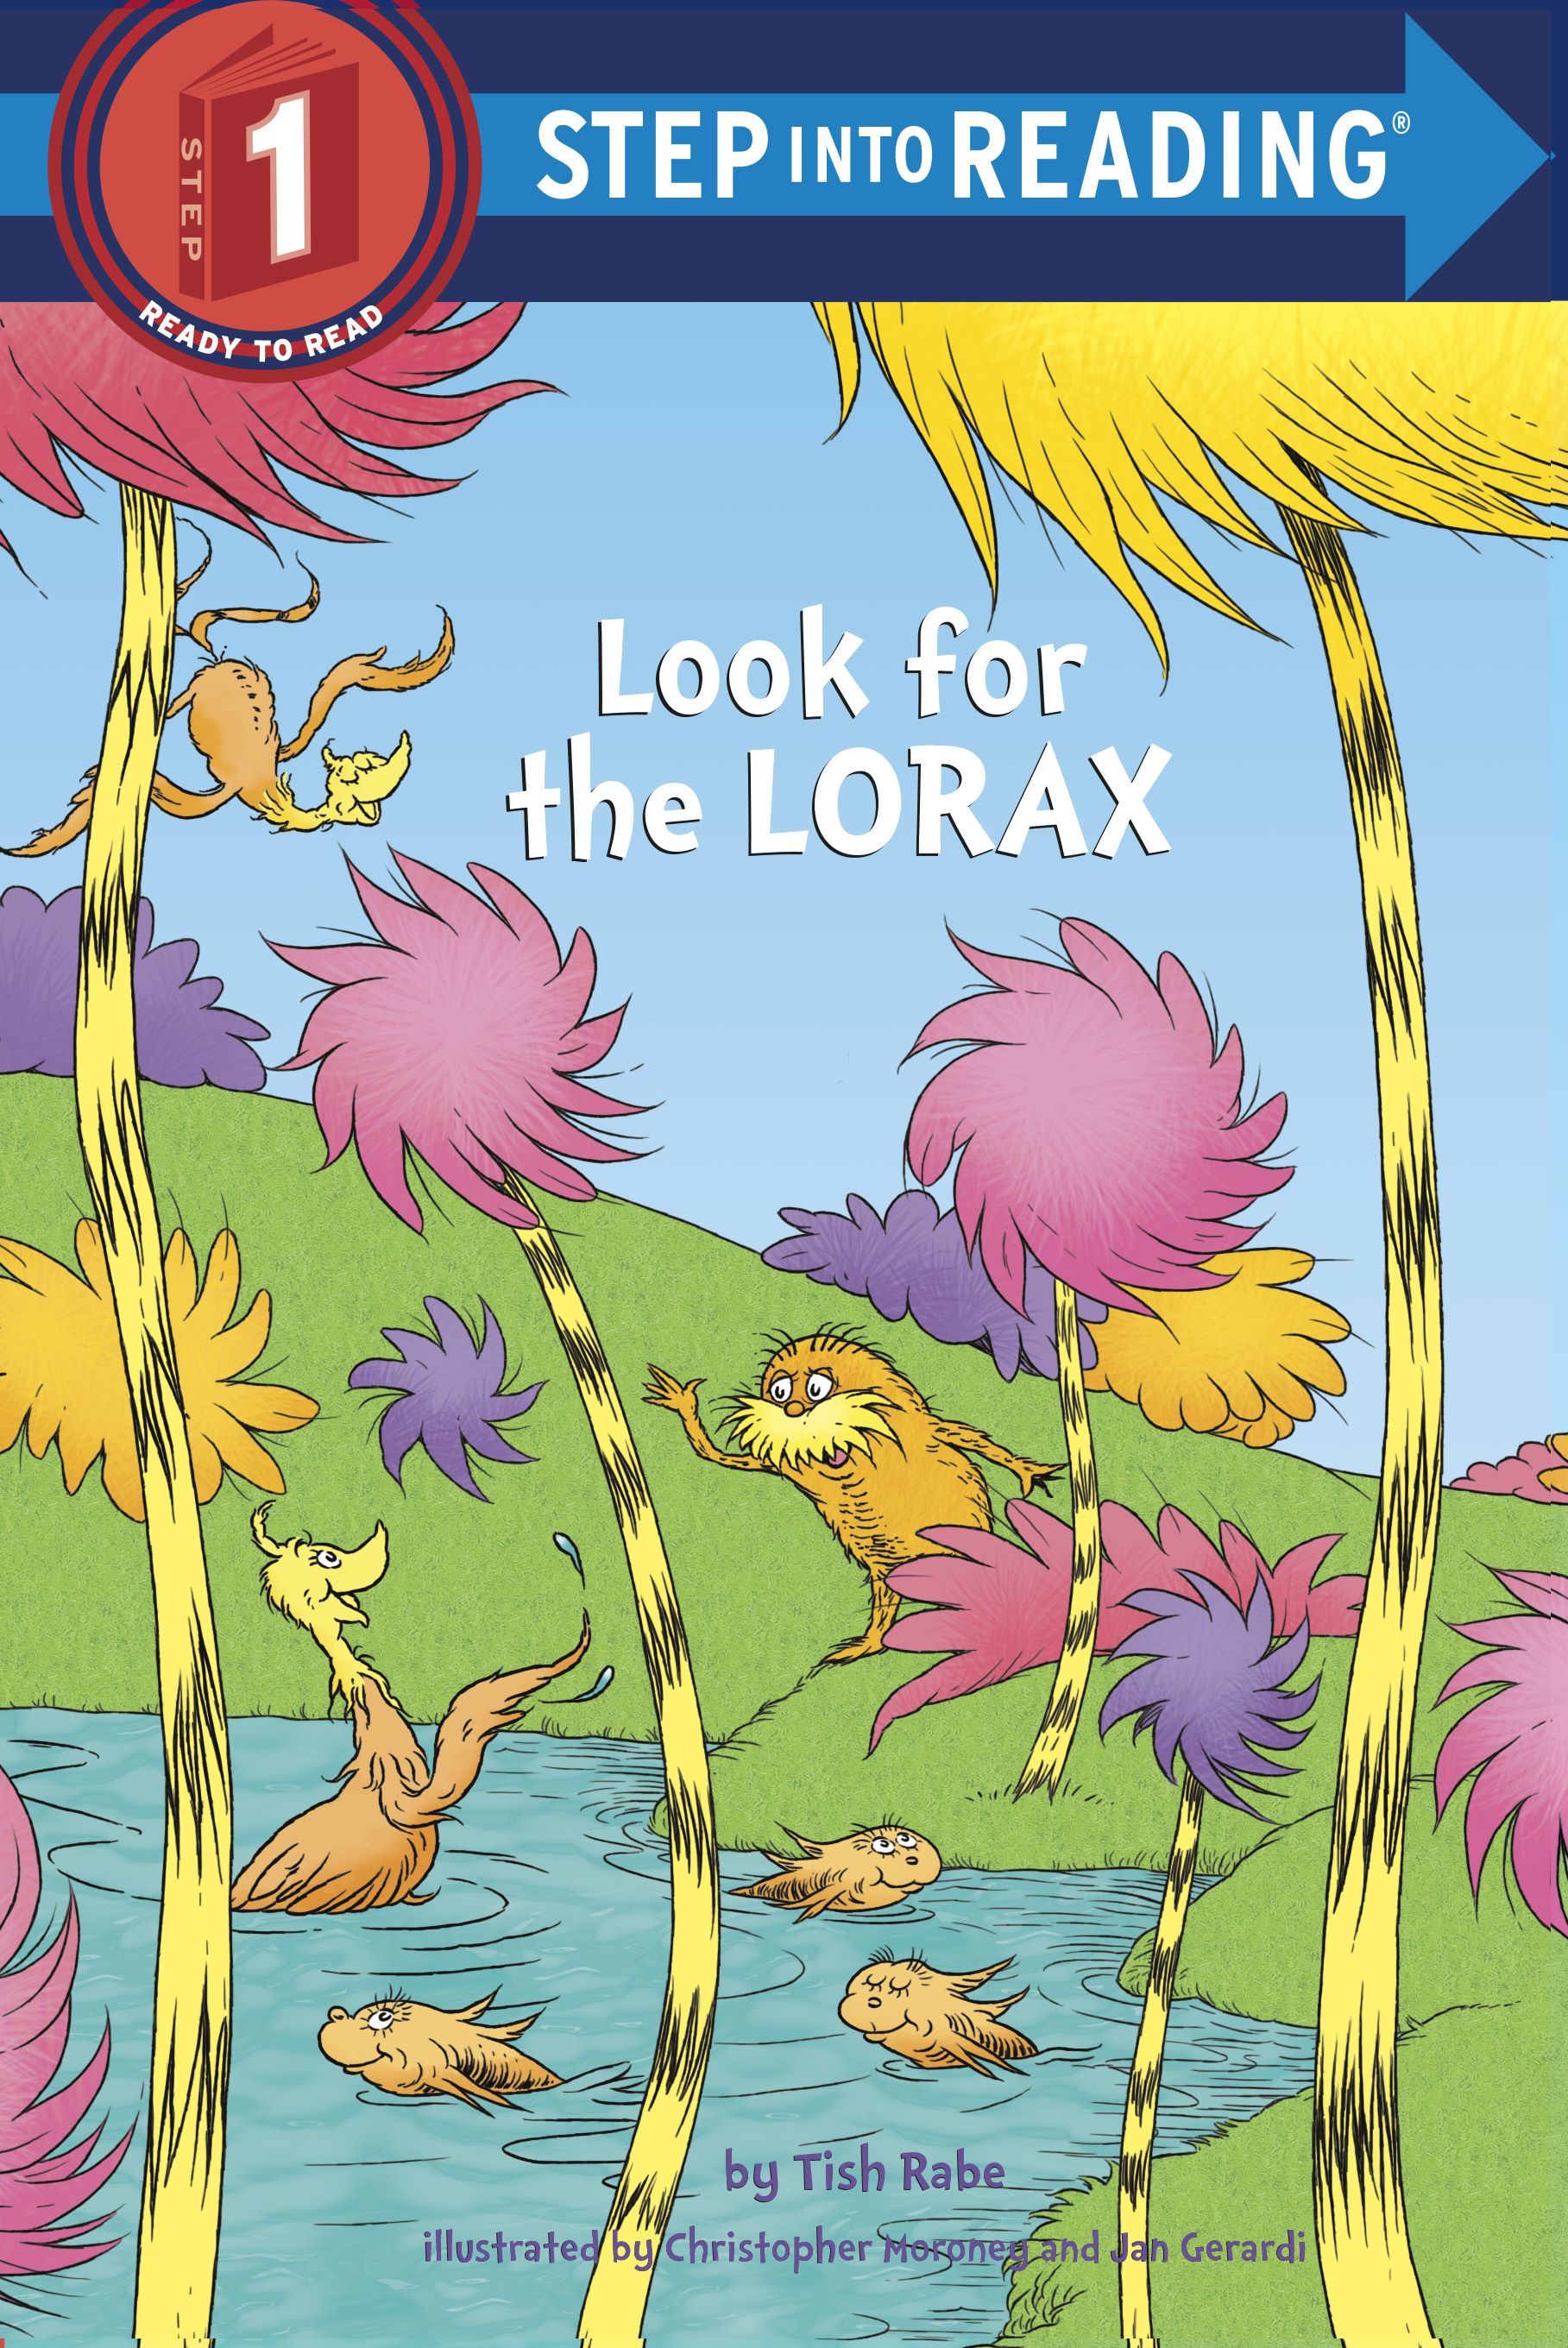 Look For The Lorax (Dr. Seuss)